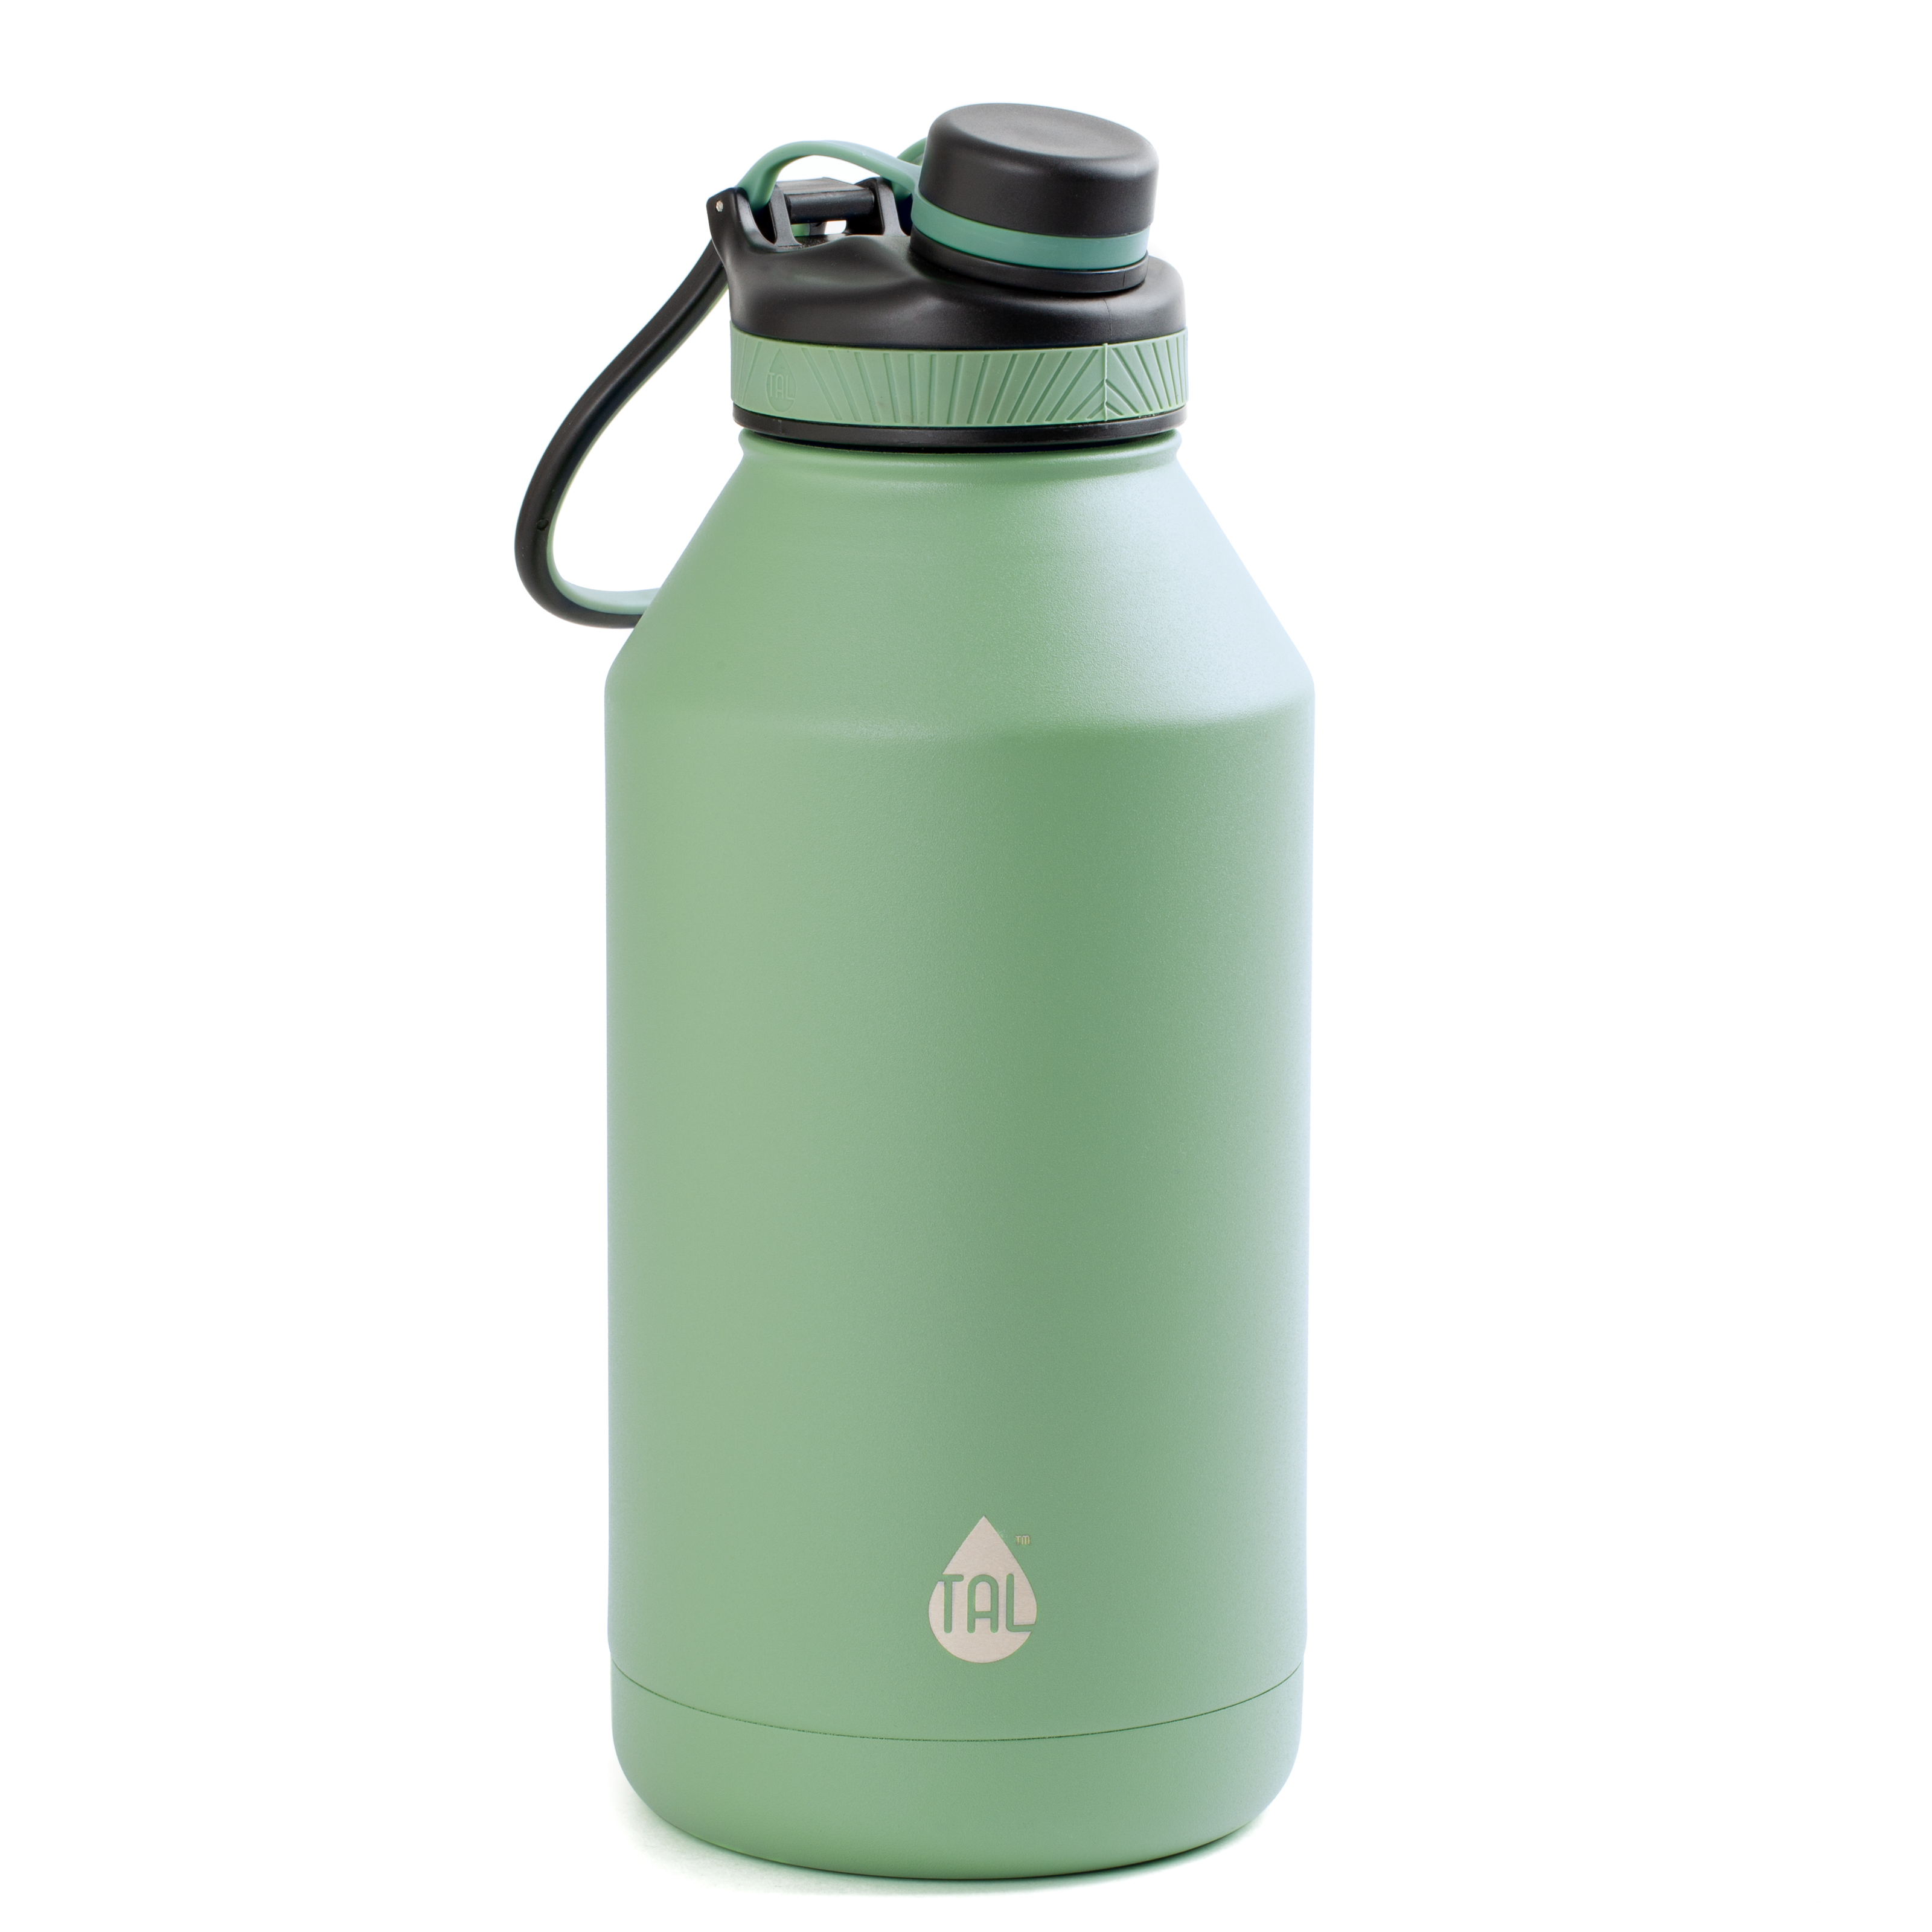 TAL 64 oz Sage Green Solid Print Stainless Steel Water Bottle - image 1 of 9